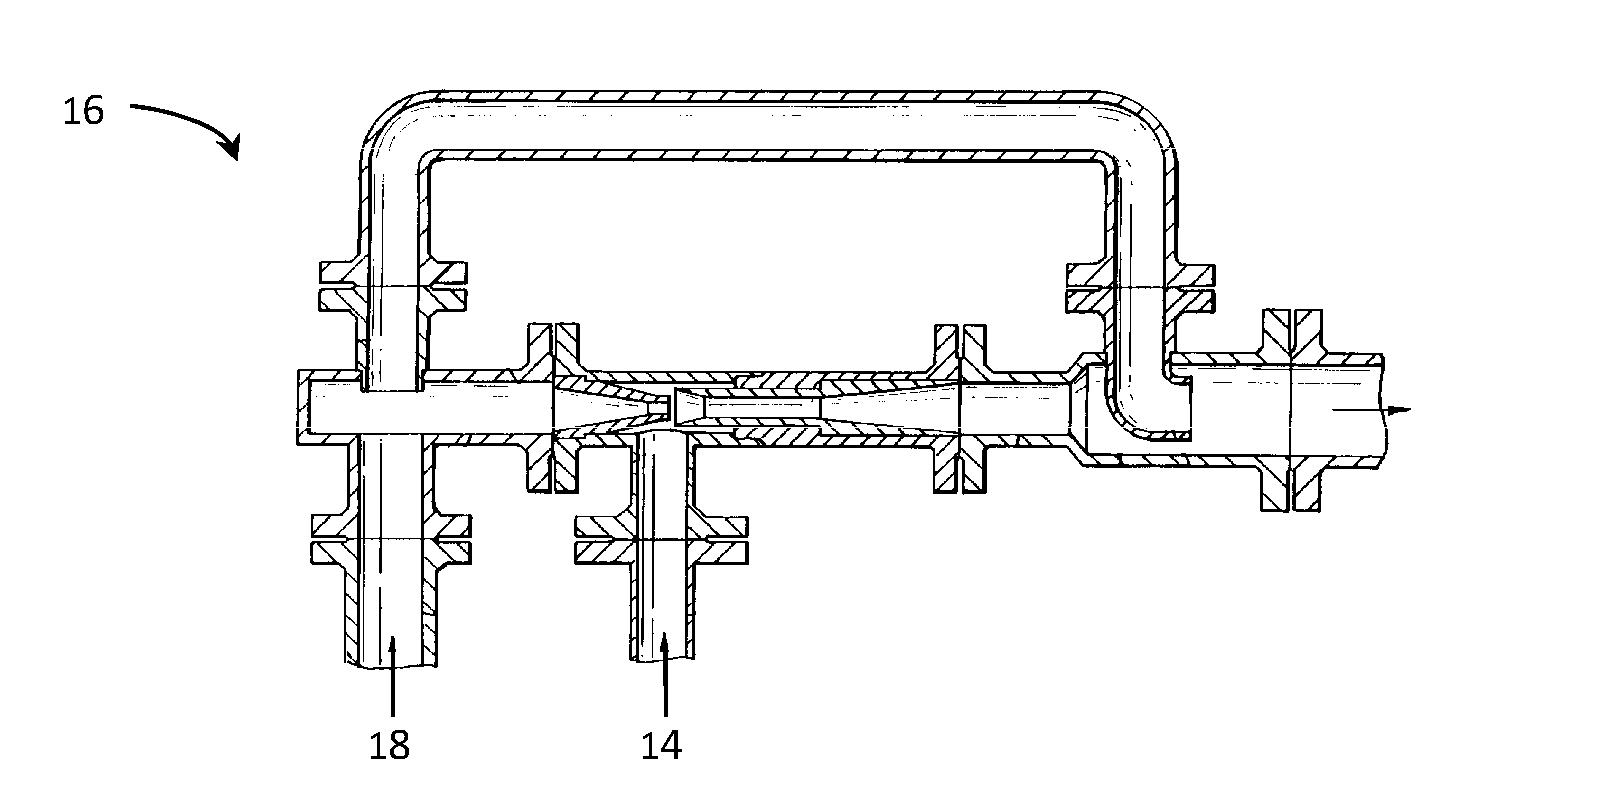 Gas lift system for oil production